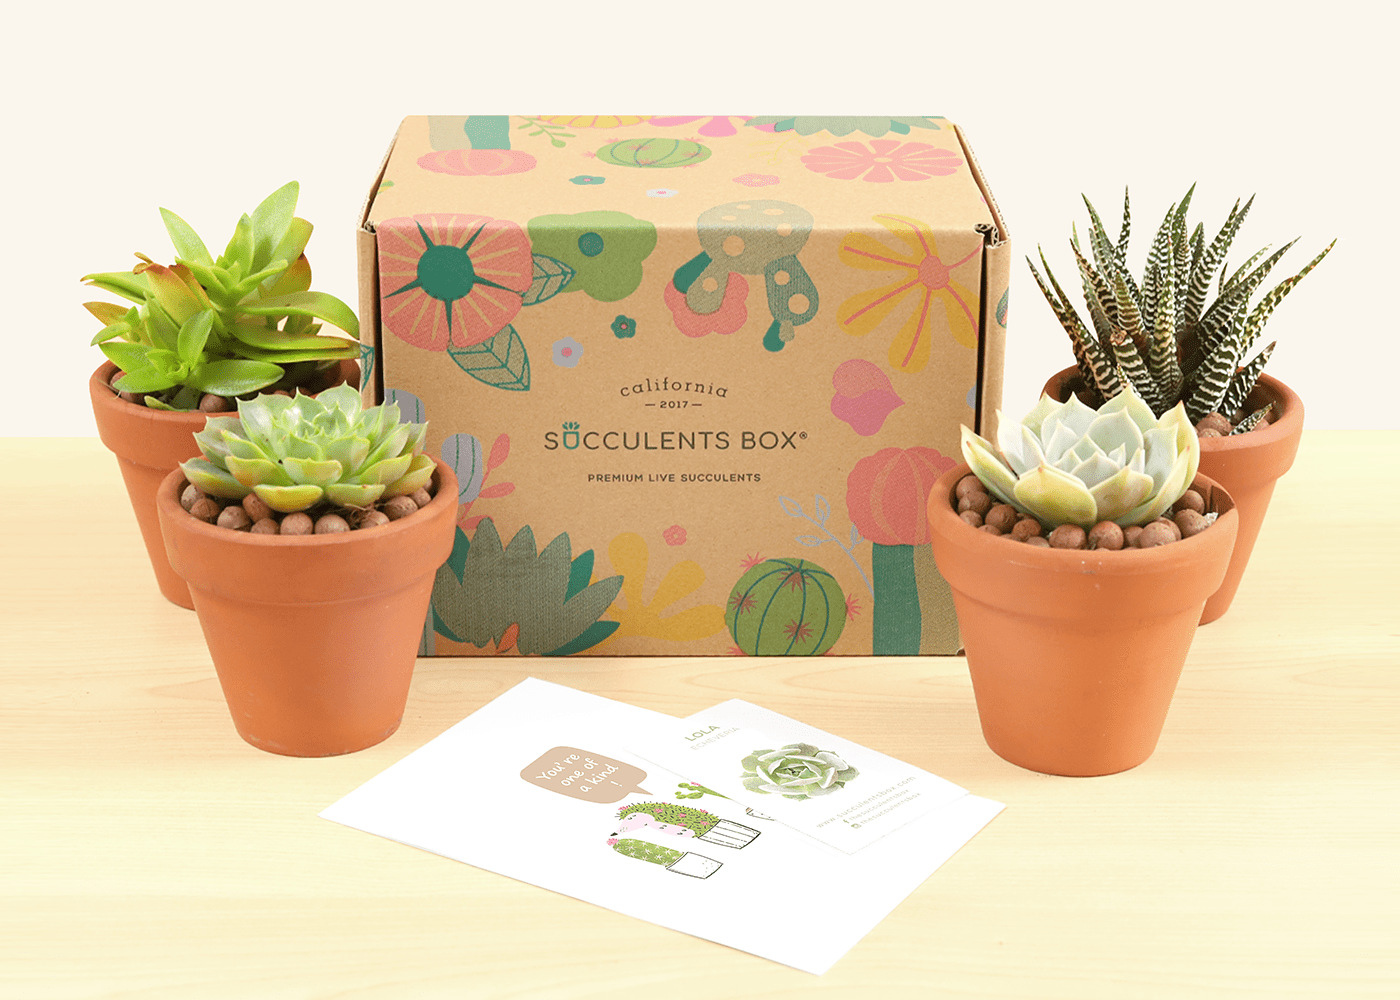 Succulents Box Reviews Get All The Details At Hello Subscription!